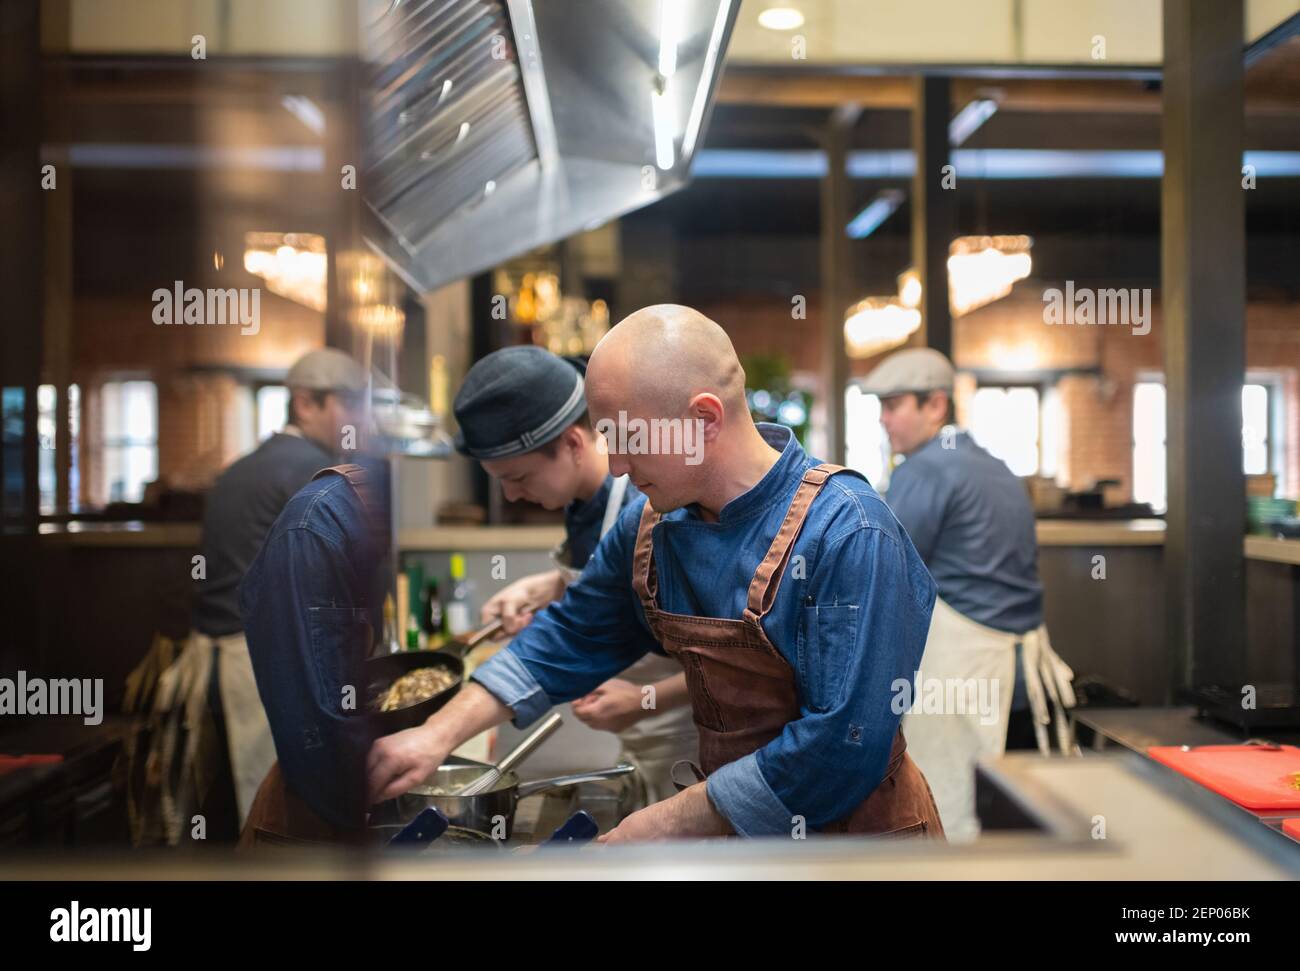 Bald man in apron boiling food near male employees during work in kitchen of cafe Stock Photo